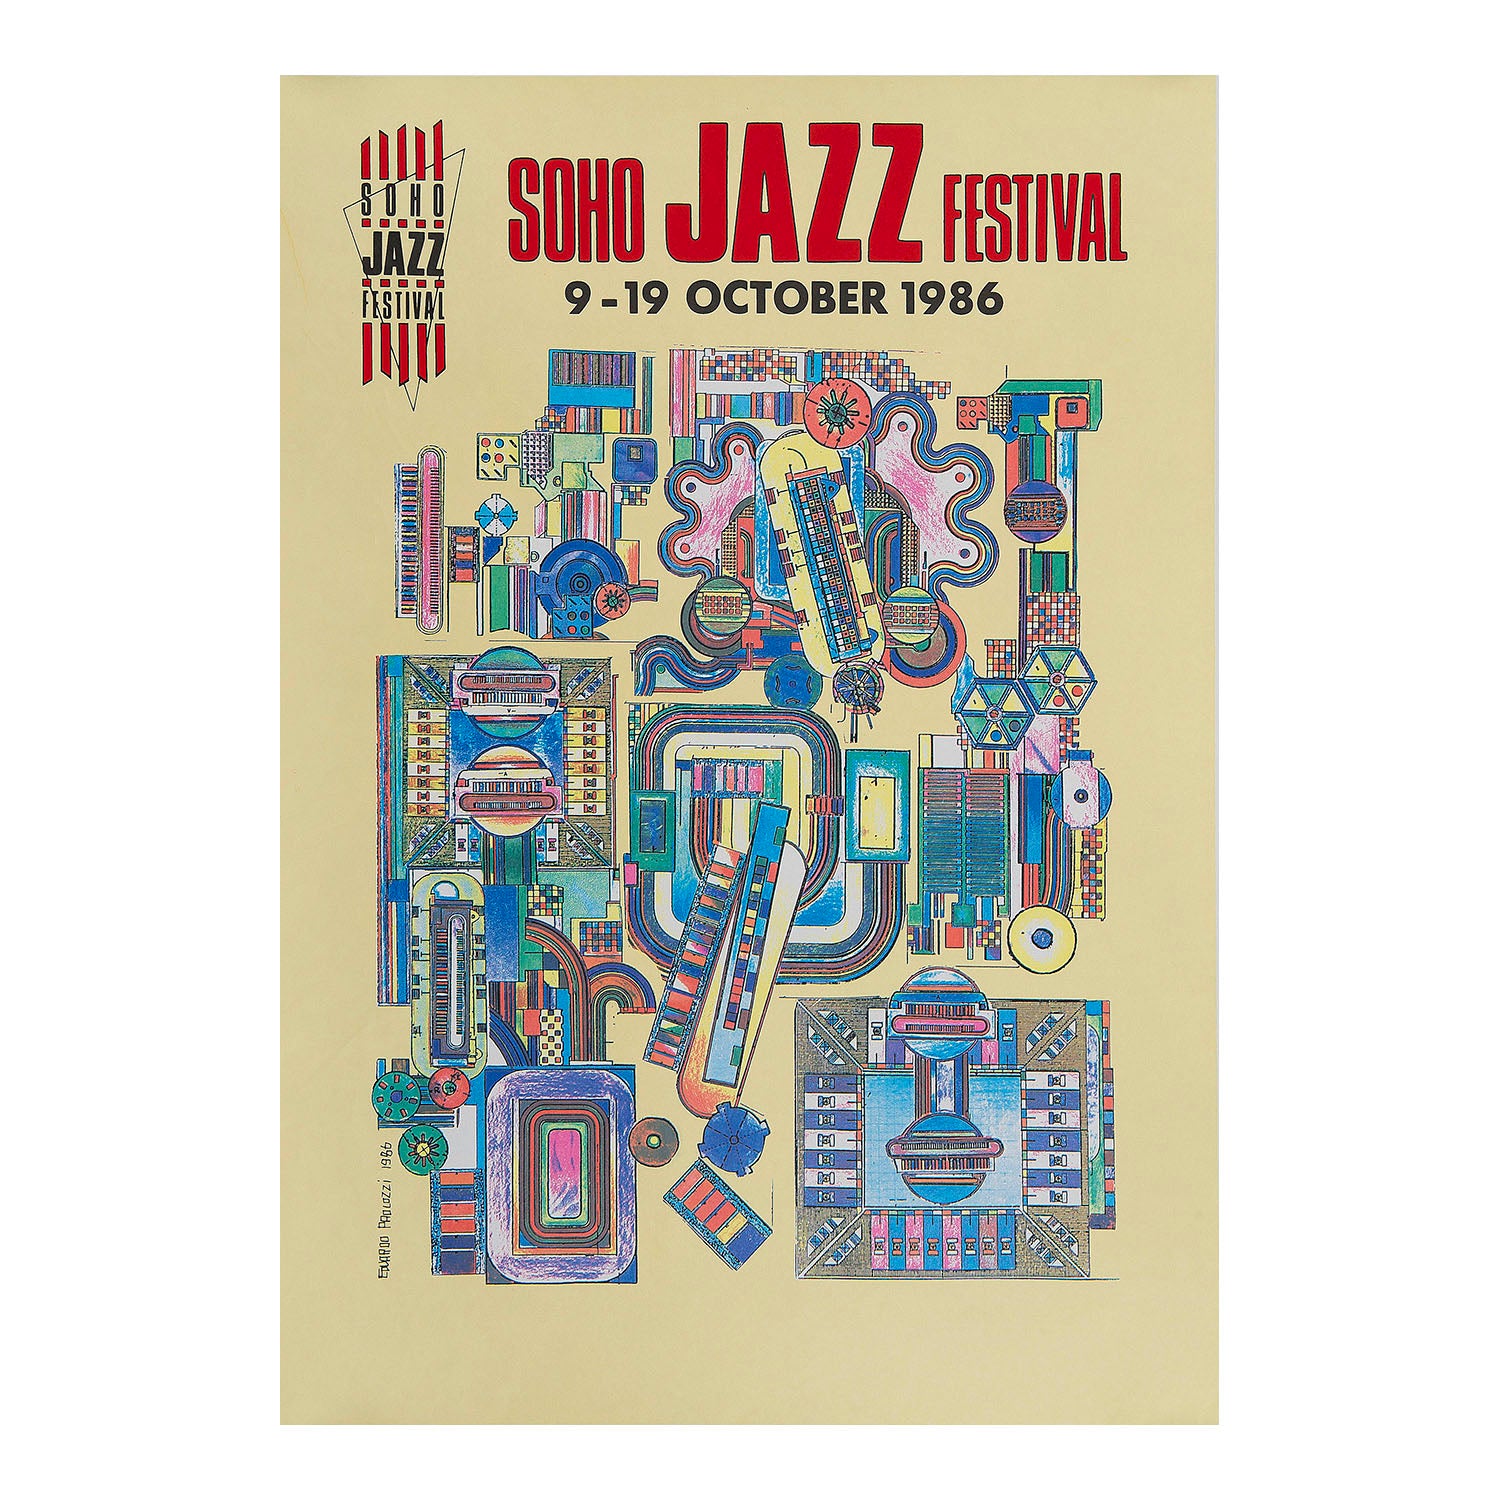 An original poster from the inaugural Soho Jazz Festival, 1986, designed by the ‘godfather’ of pop art, Eduardo Paolozzi.